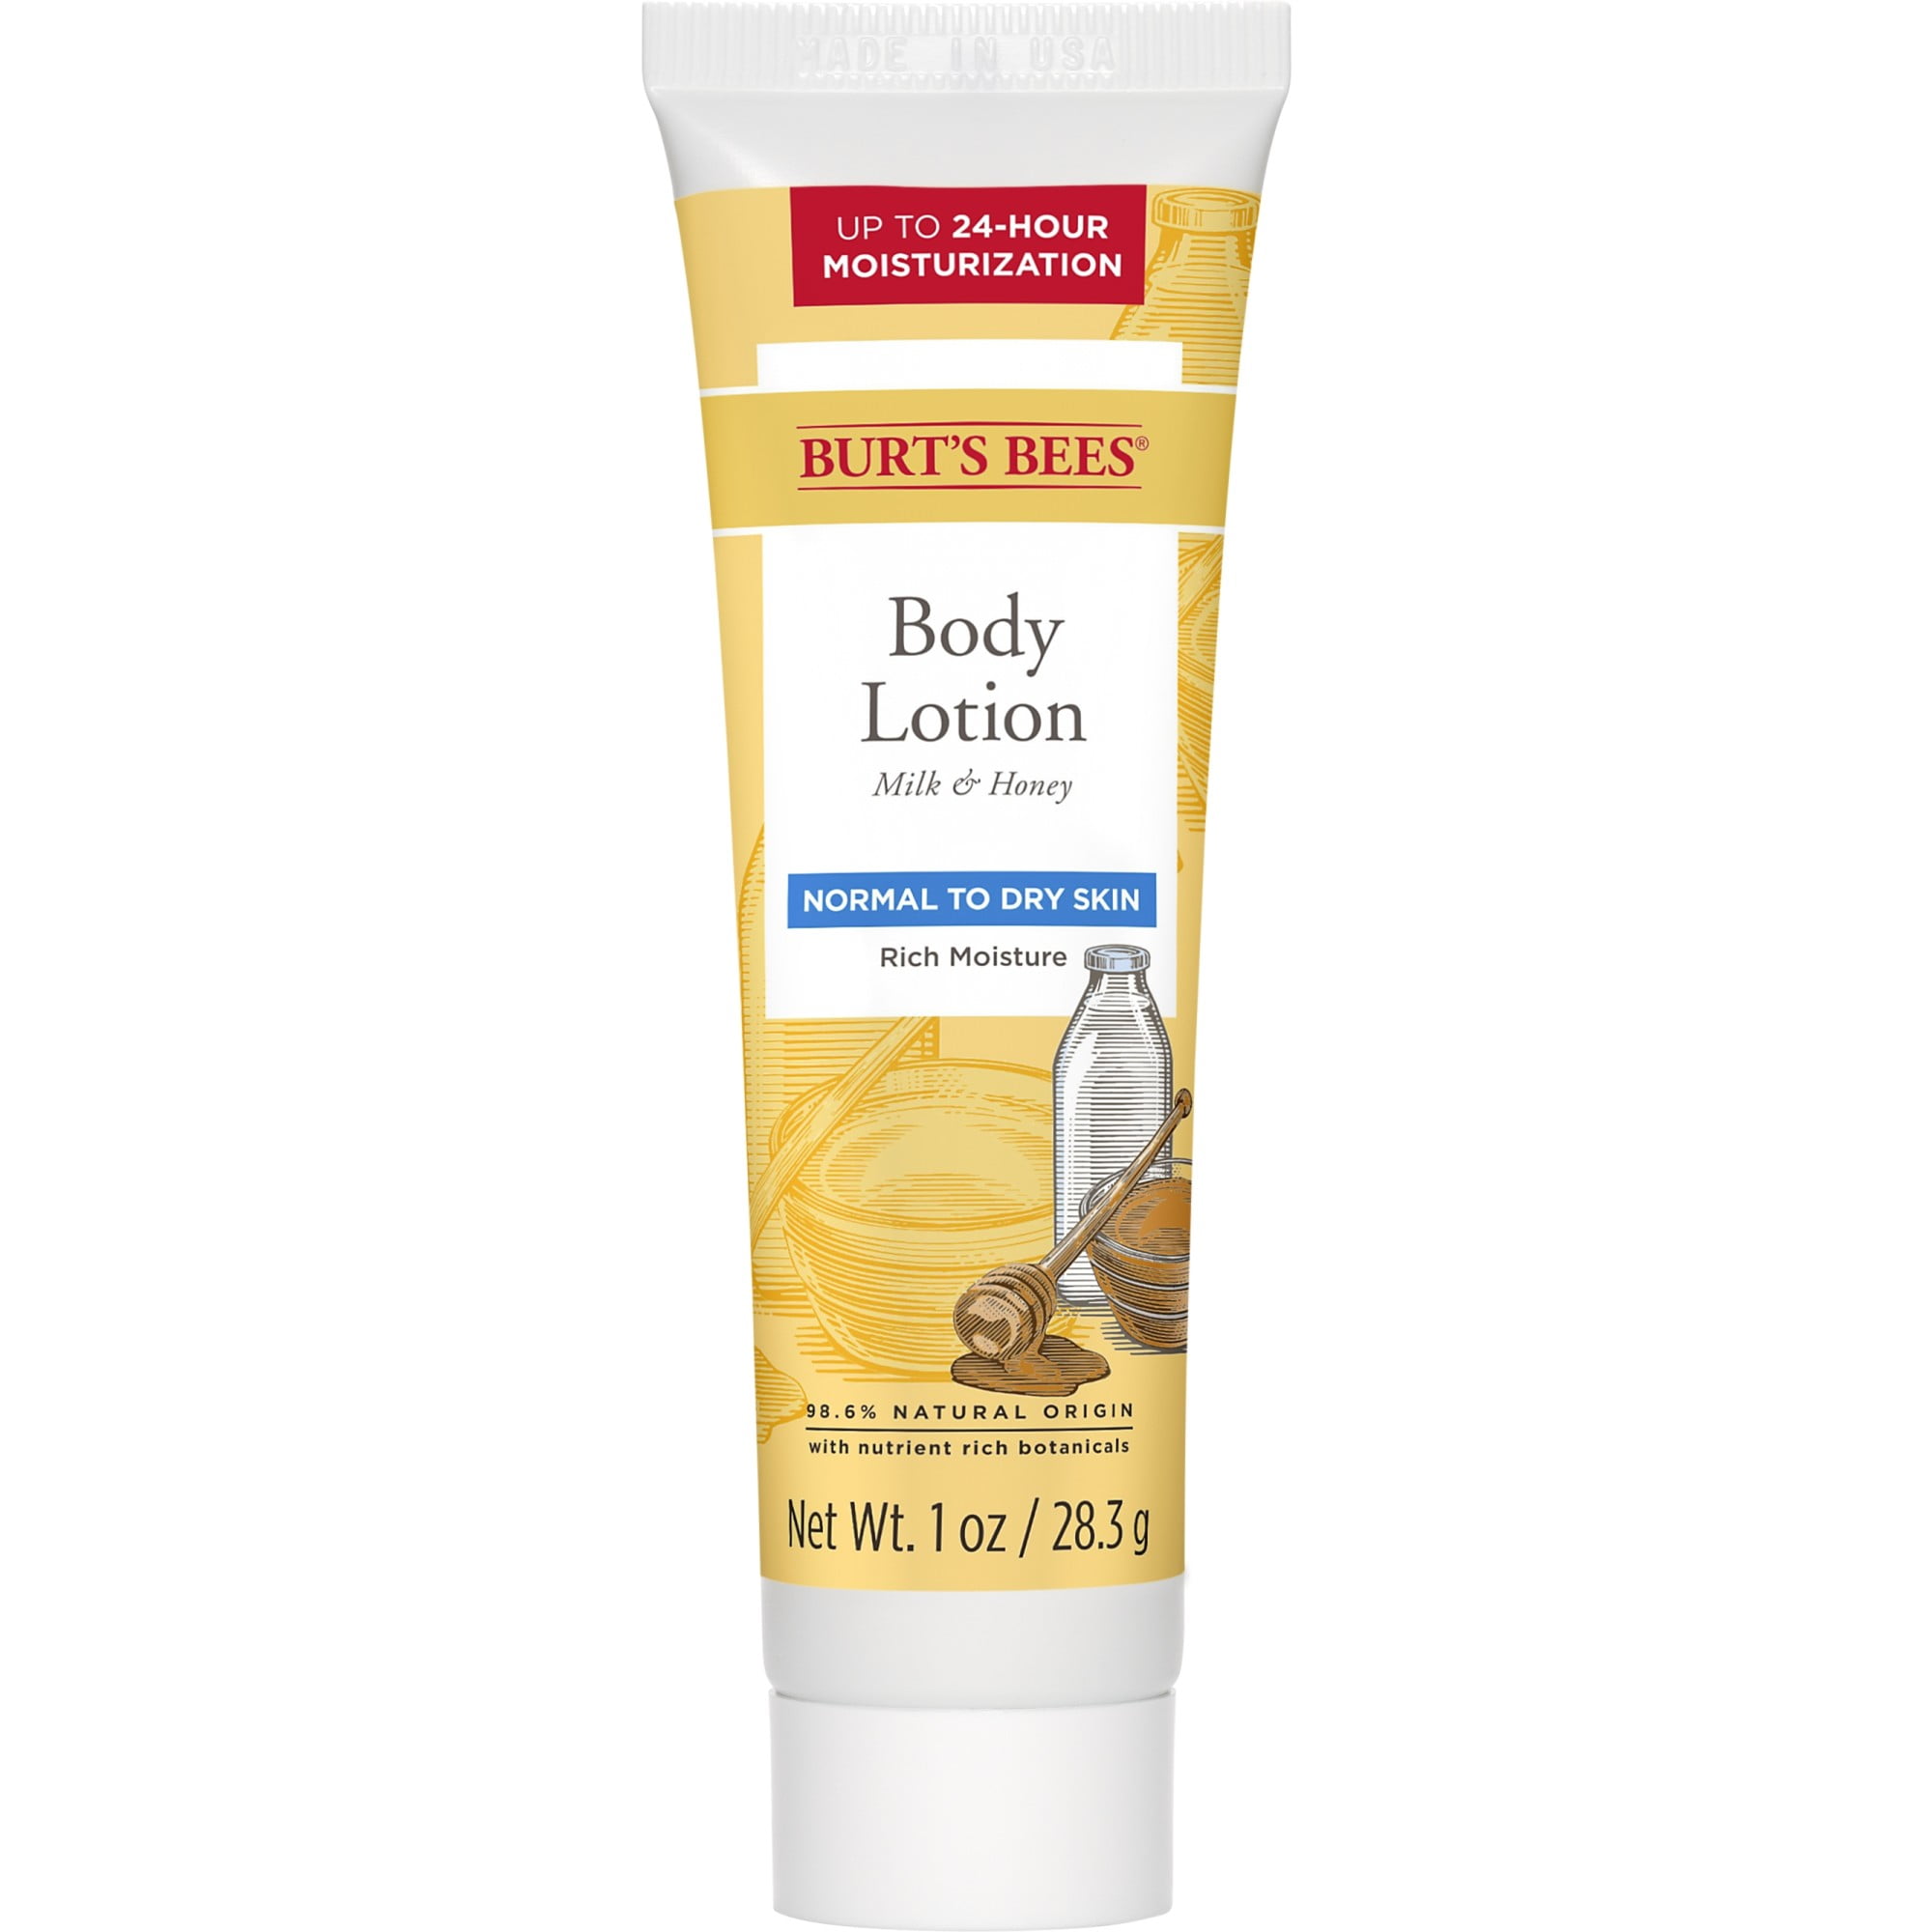 Burt's Bees Body Lotion for Normal to Dry Skin with Milk & Honey, 1 Oz Walmart.com